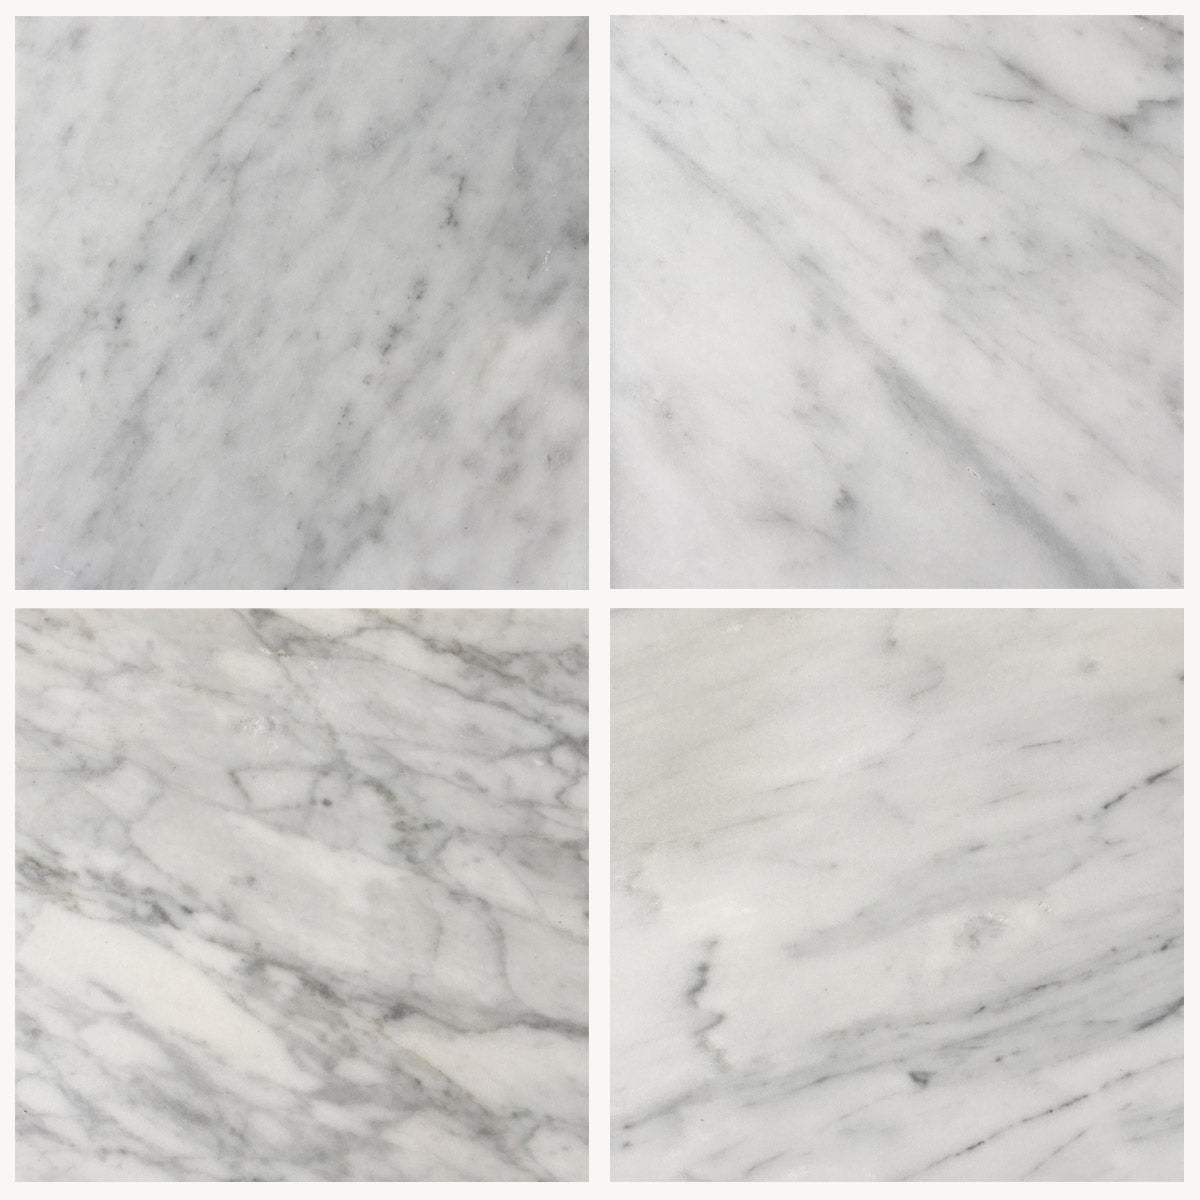 OIXDESIGN, Italian Carrara Marble, Comparison Photo, Showing Natural Character and Color Variation